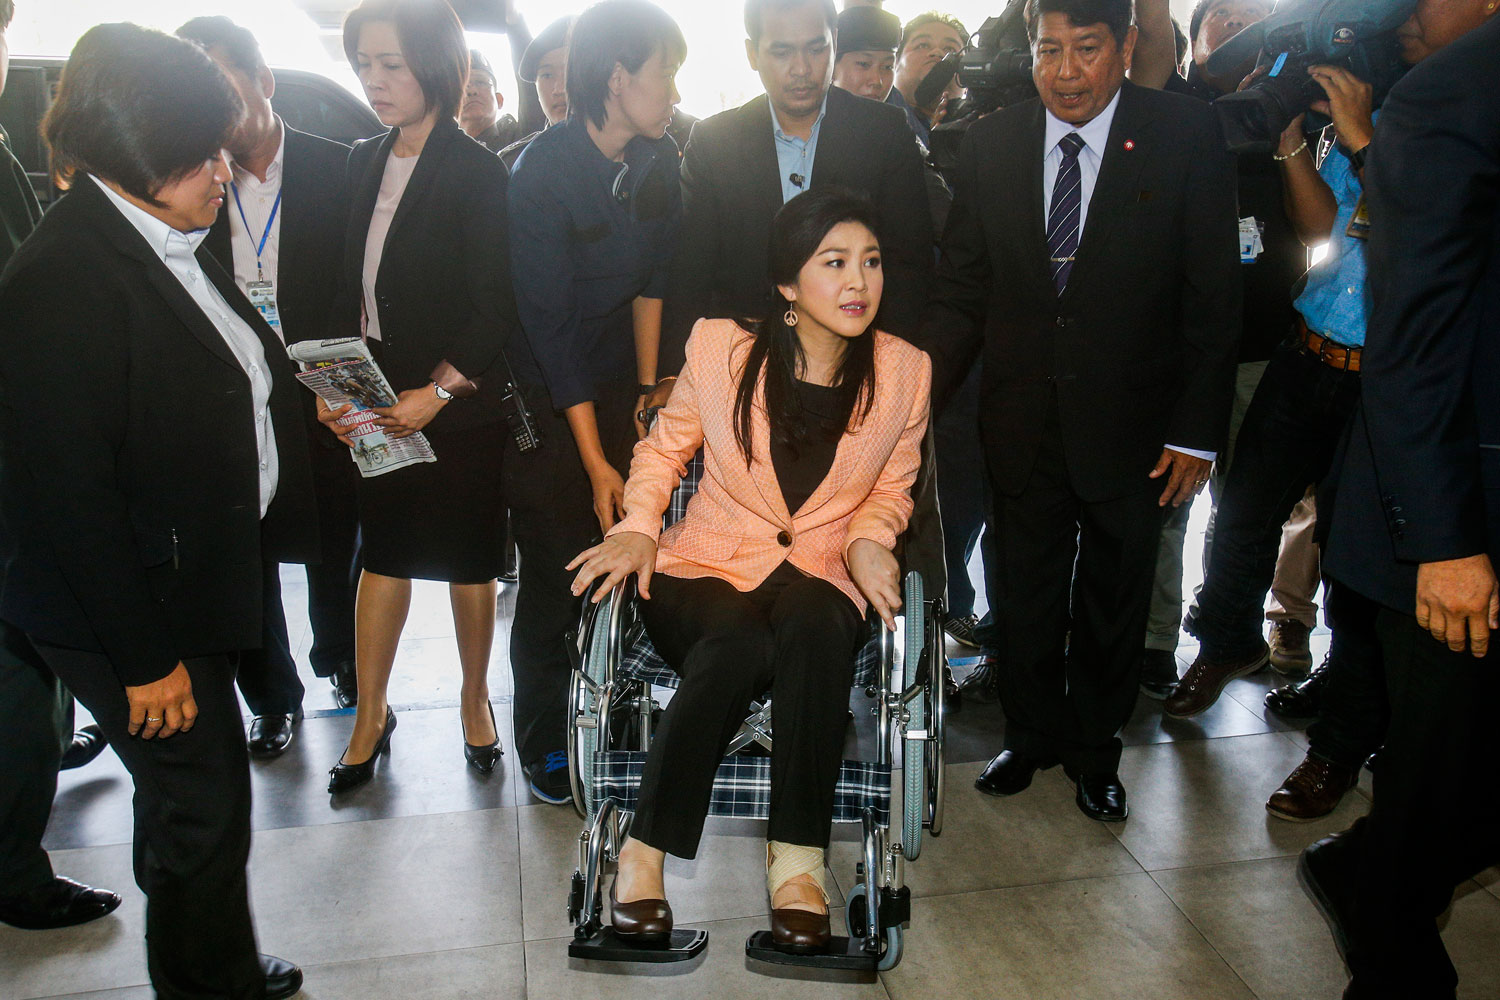 Thailand's Prime Minister Yingluck Shinawatra, center, arrives on a wheelchair at the Royal Police Cadet Academy in Nakorn Pathom province, March 18, 2014. (Athit Perawongmetha—Reuters)